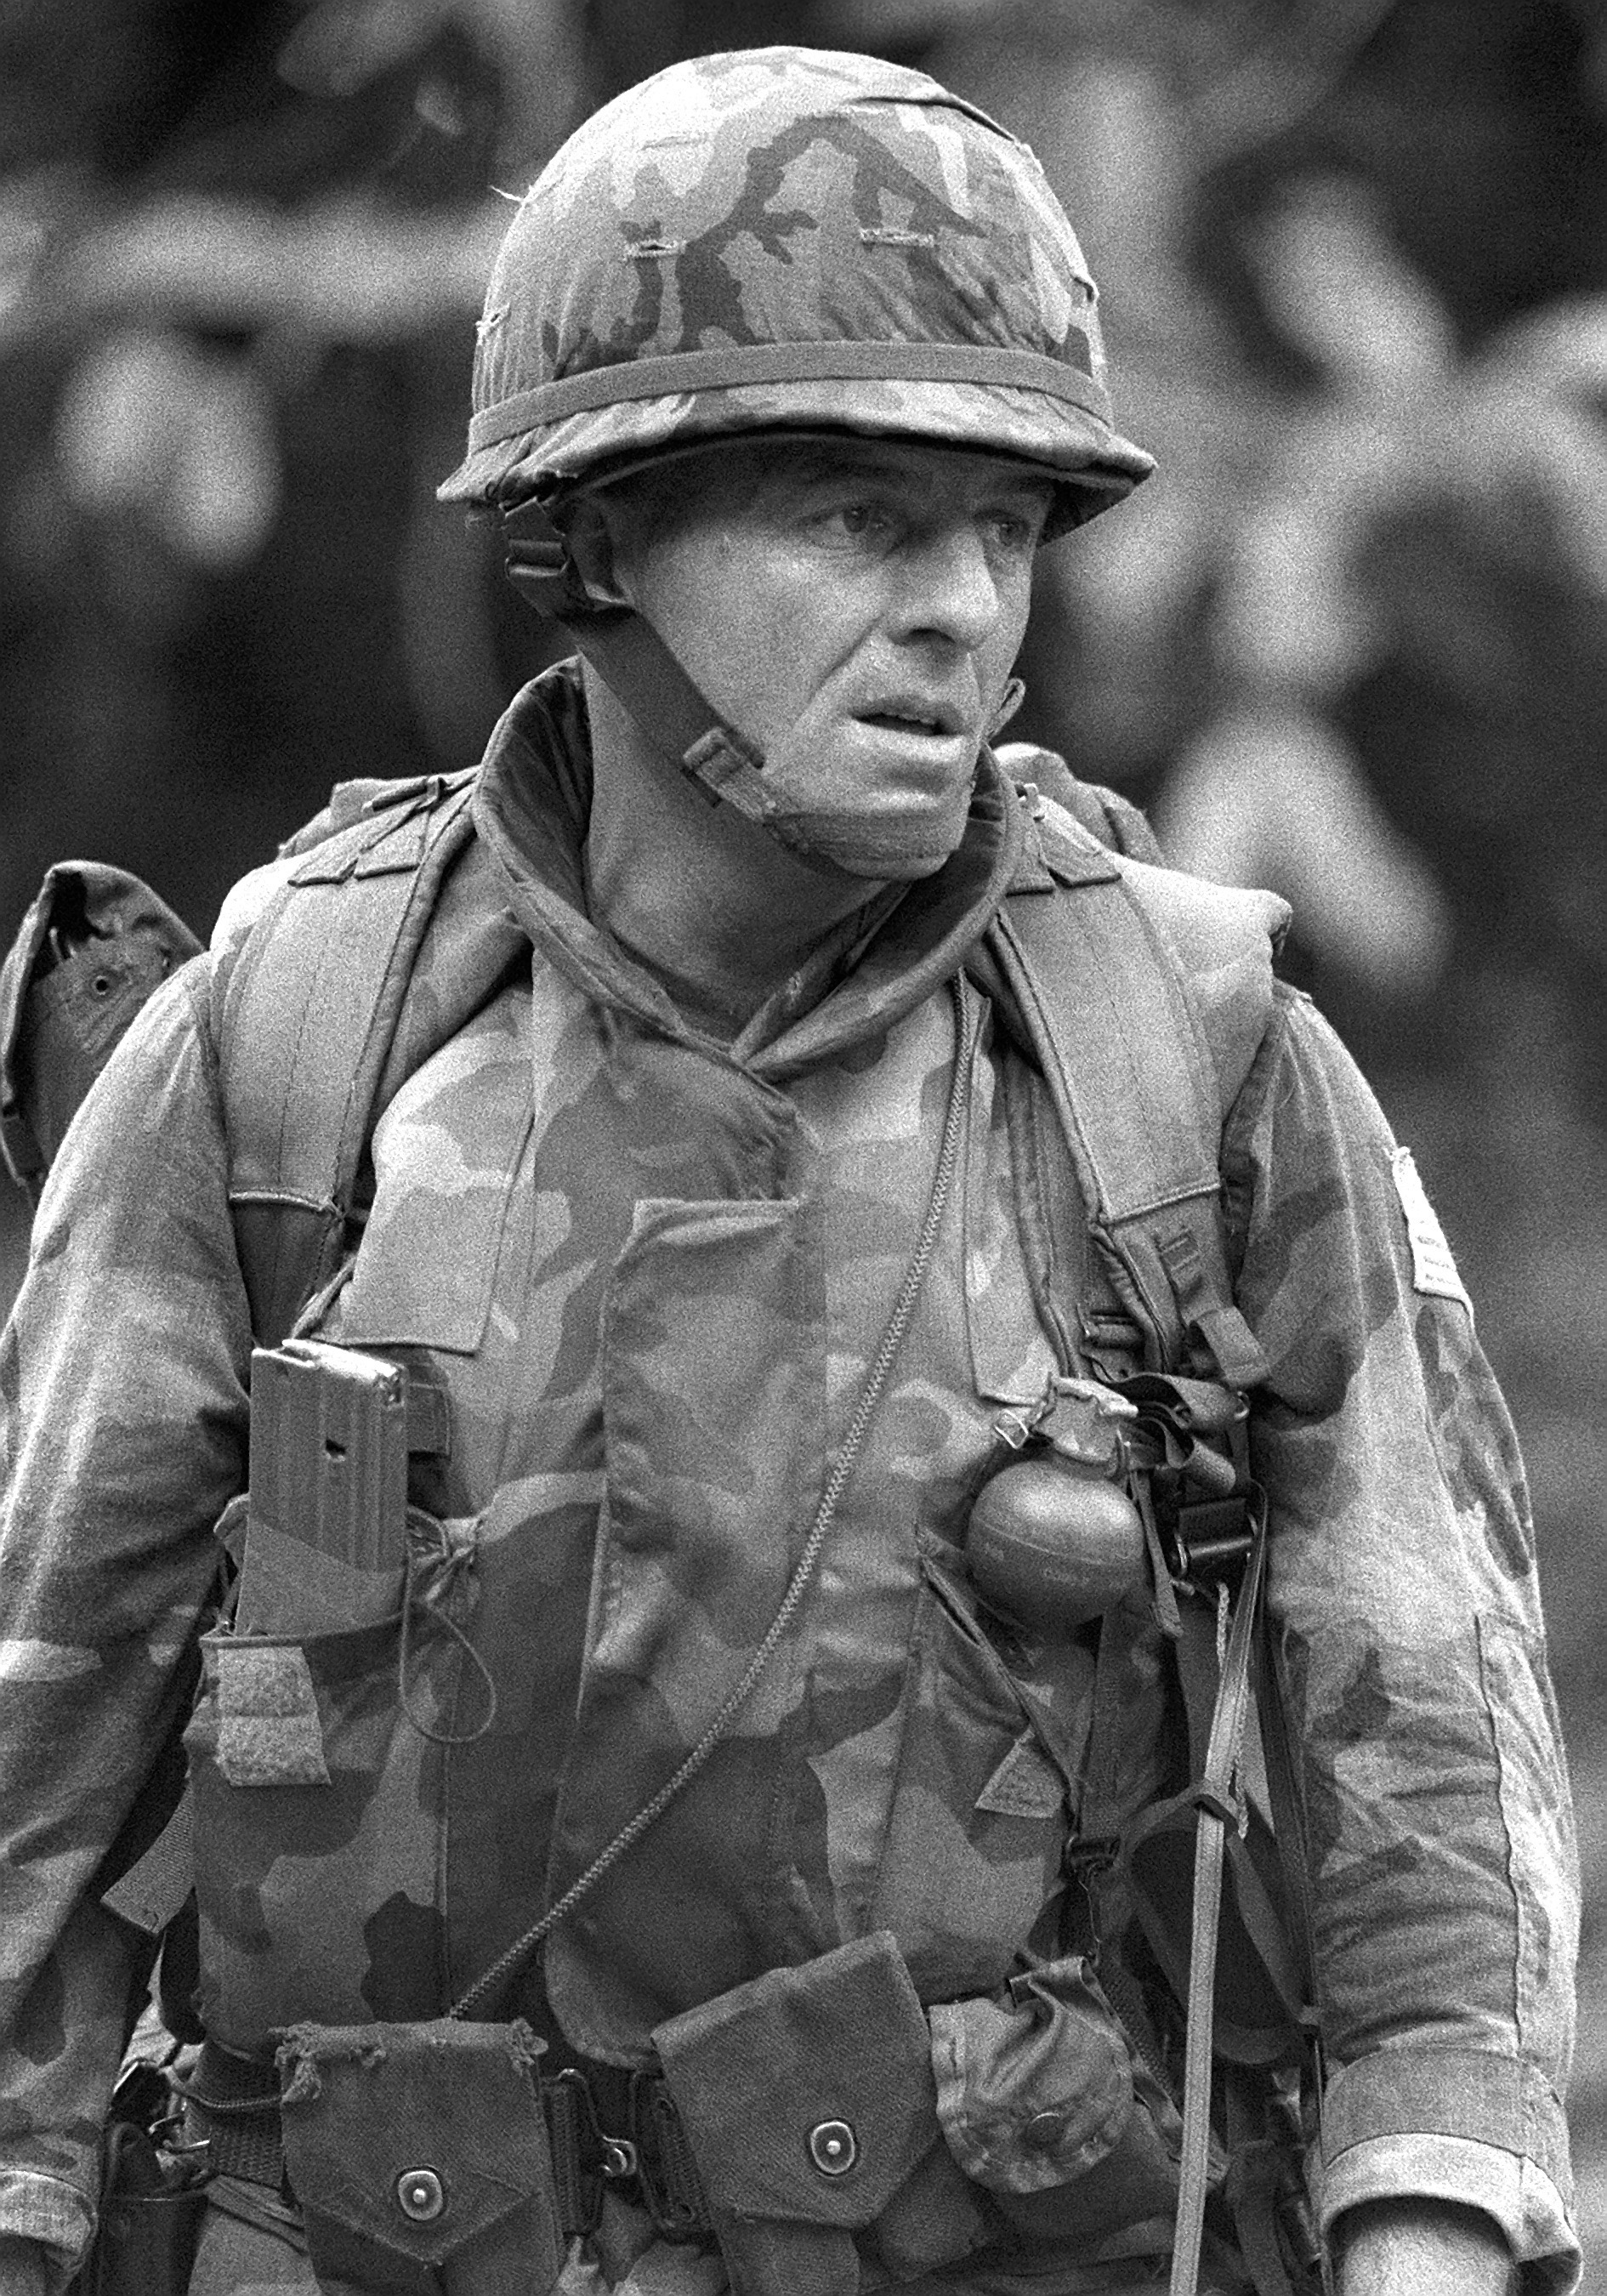 a-close-up-view-of-a-marine-as-he-patrols-the-streets-of-grenville-during-operation-e89c93.jpg